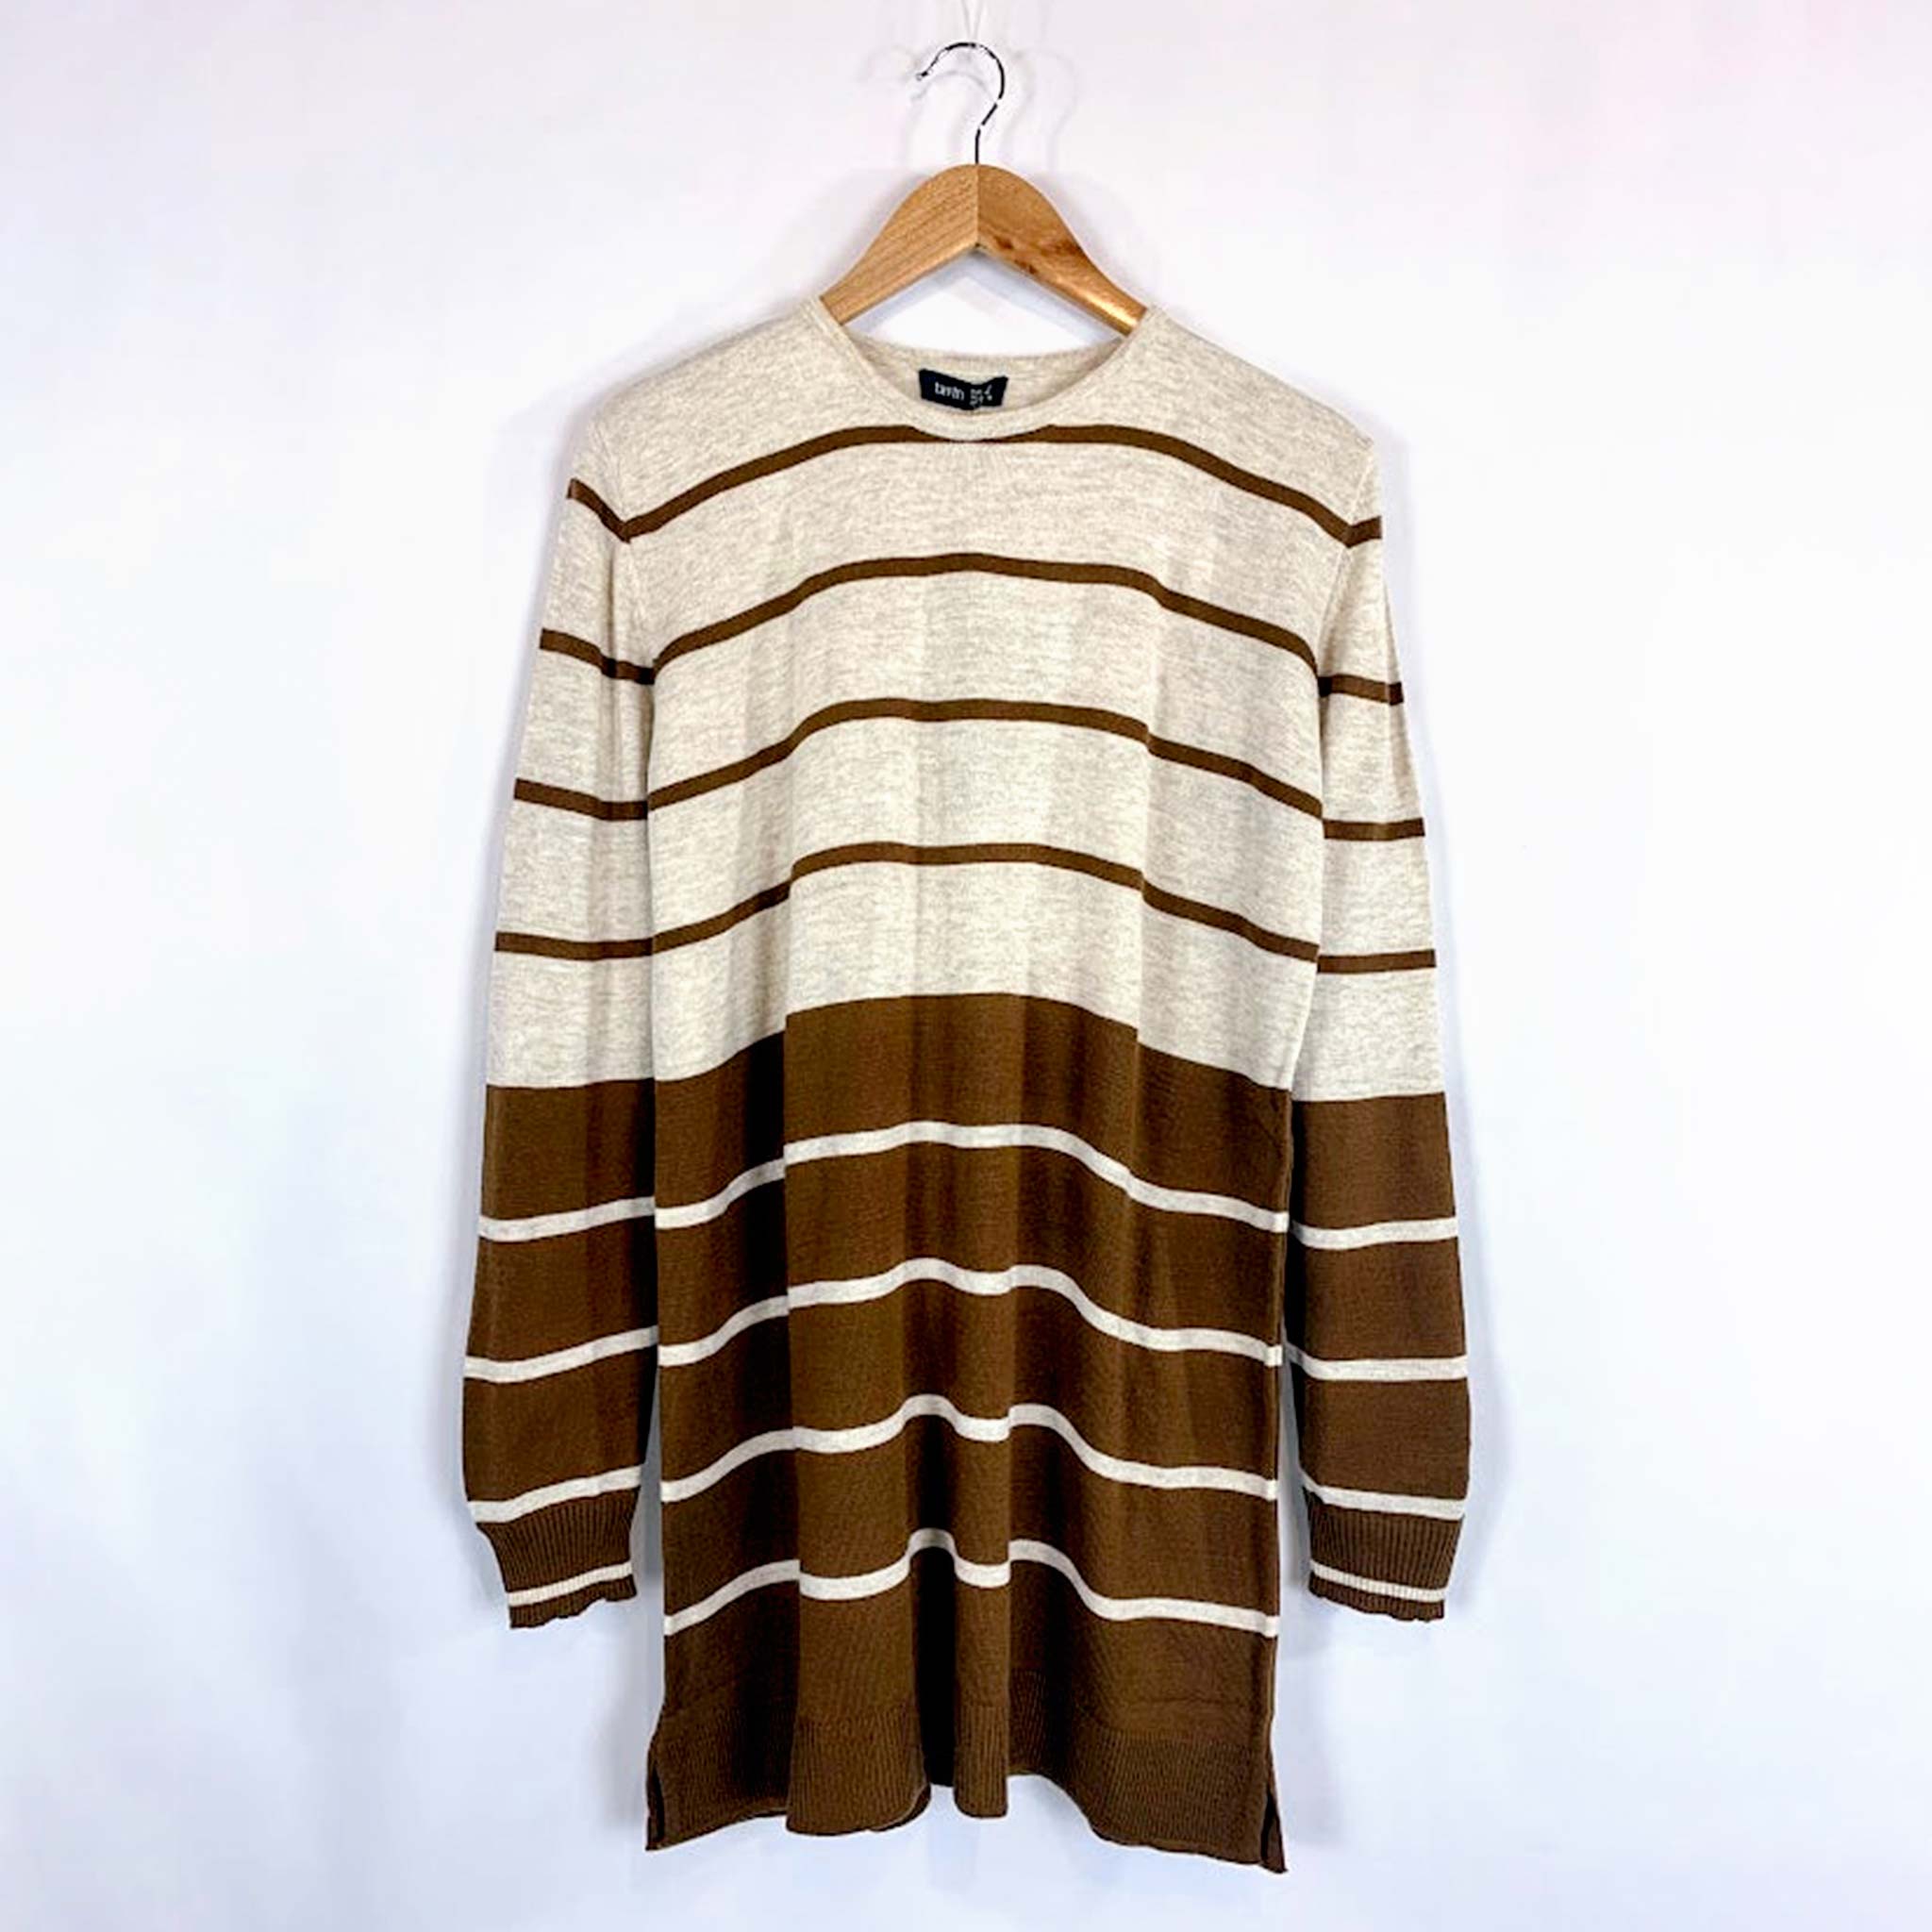 Paitluc Striped Knit Tops Can Create So Many Different Looks